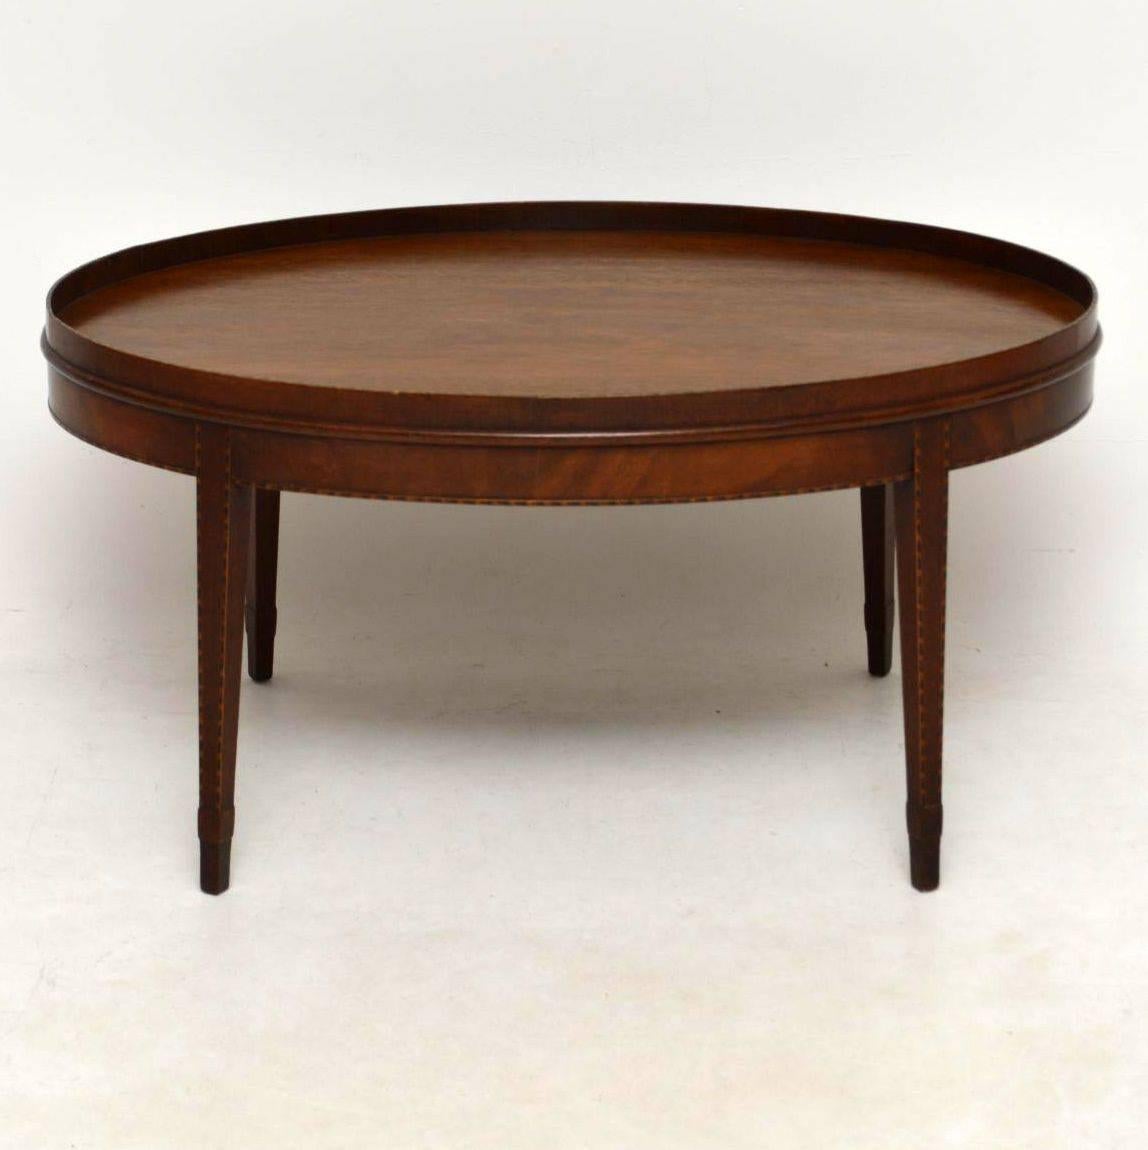 Very elegant antique mahogany oval top coffee table in good condition and dating from around the 1910s-1920s period. It has a gallery around the top edge and the side border is flame mahogany. The tapered legs are angled outwards and have an added